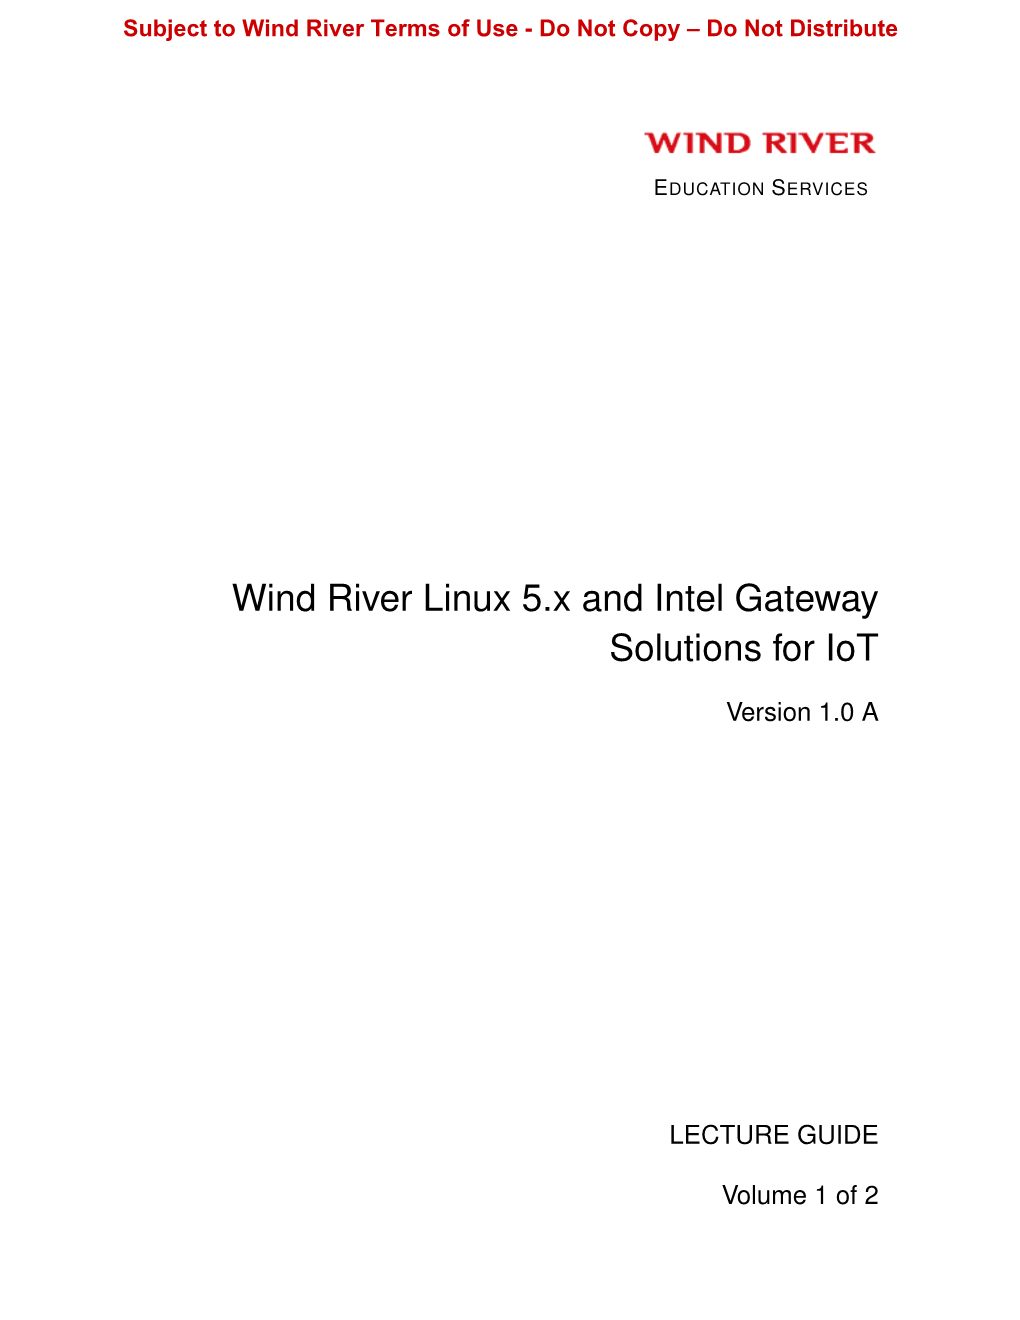 Wind River Linux 5.X and Intel Gateway Solutions for Iot